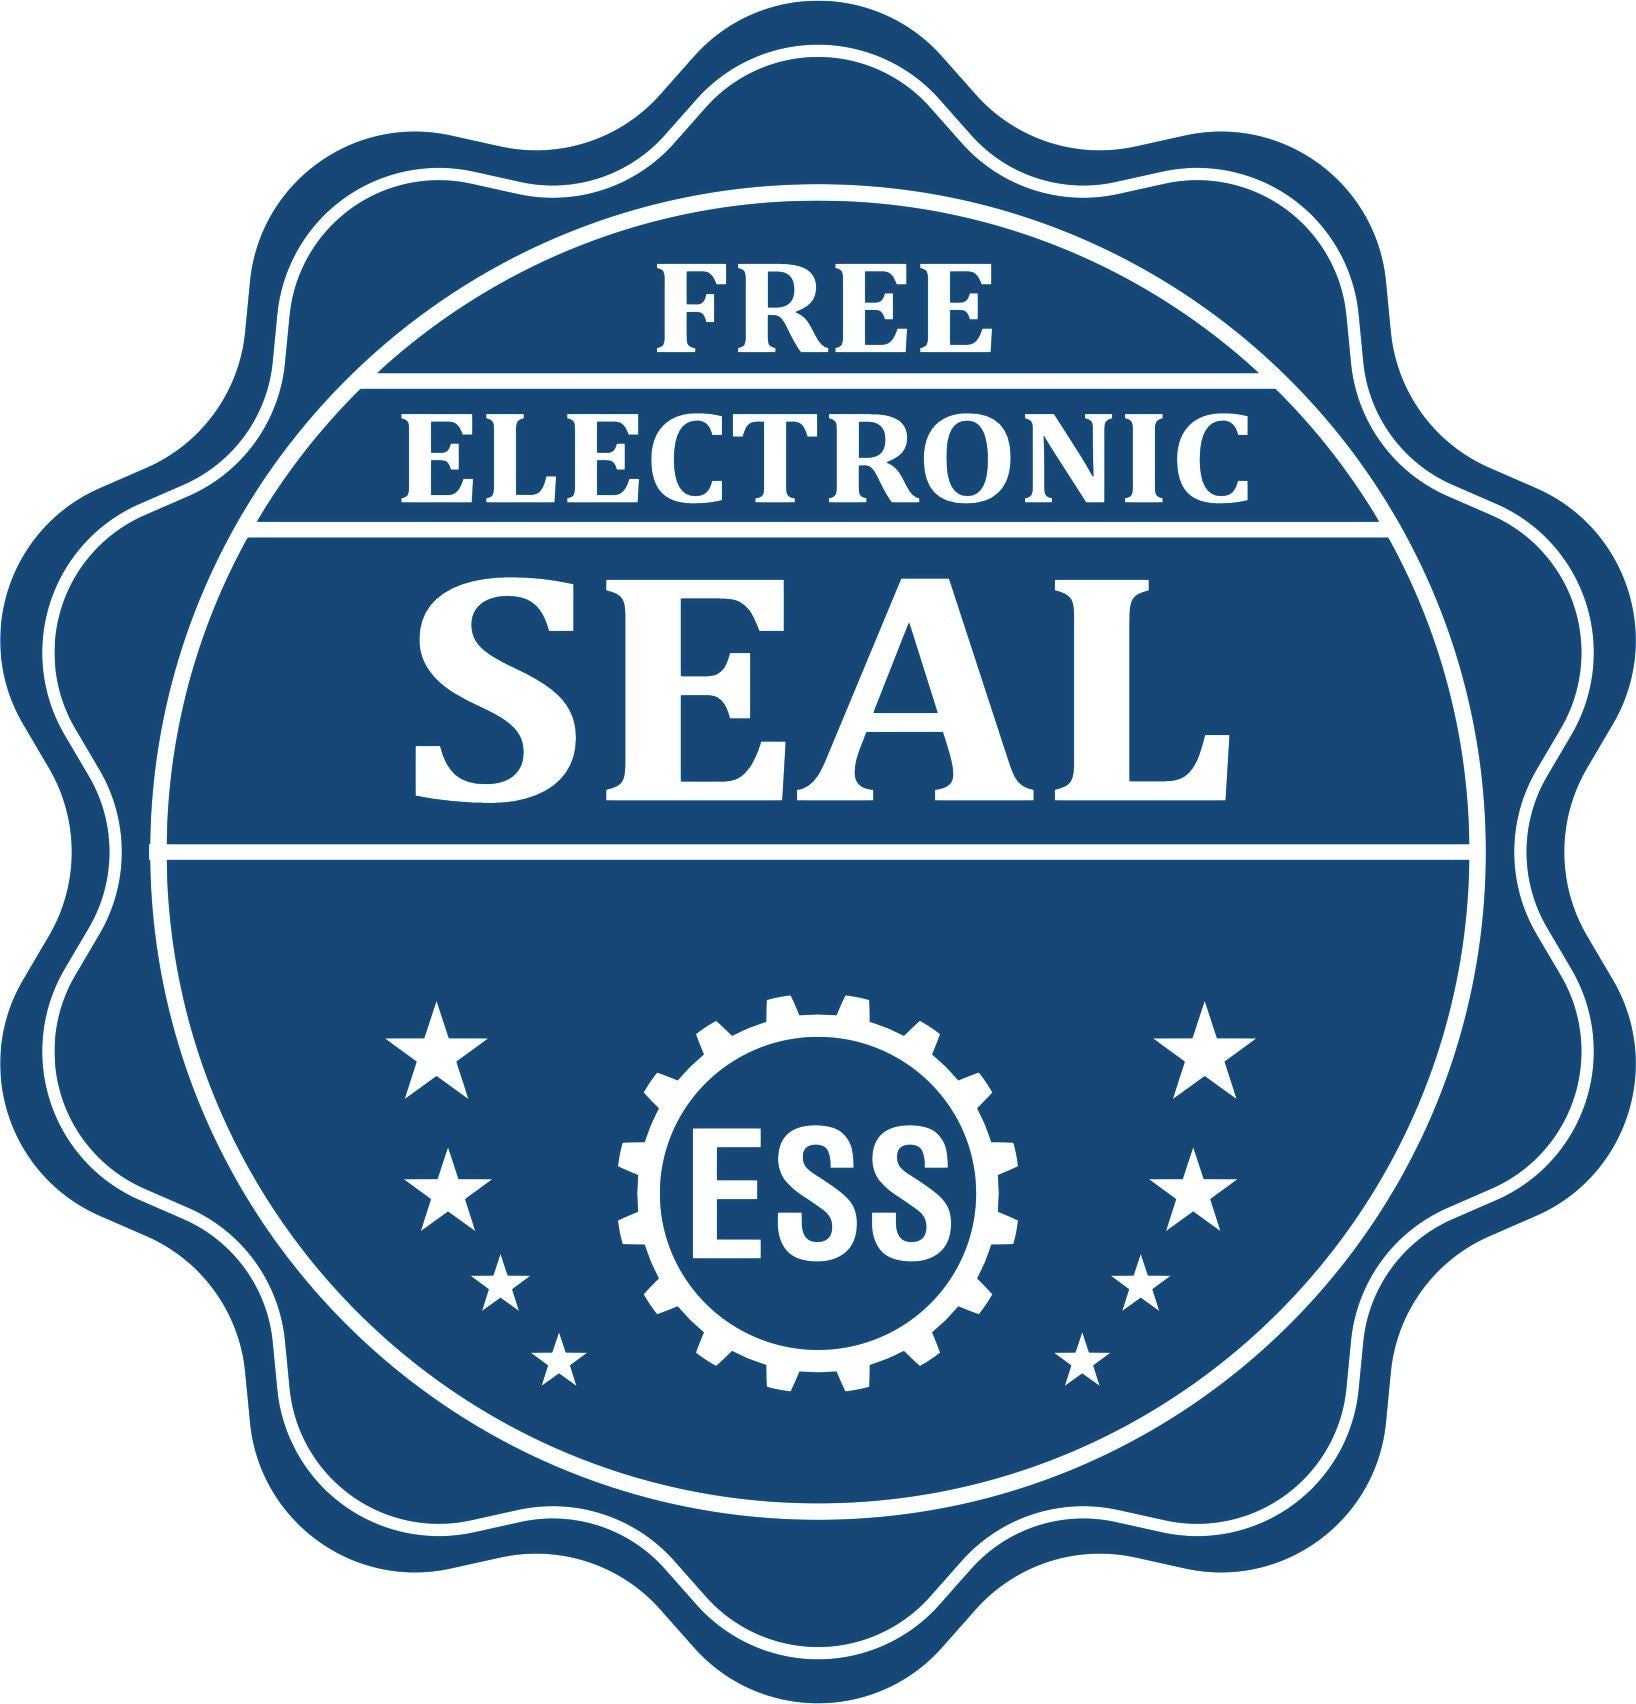 A badge showing a free electronic seal for the Heavy Duty Cast Iron Tennessee Land Surveyor Seal Embosser with stars and the ESS gear on the emblem.